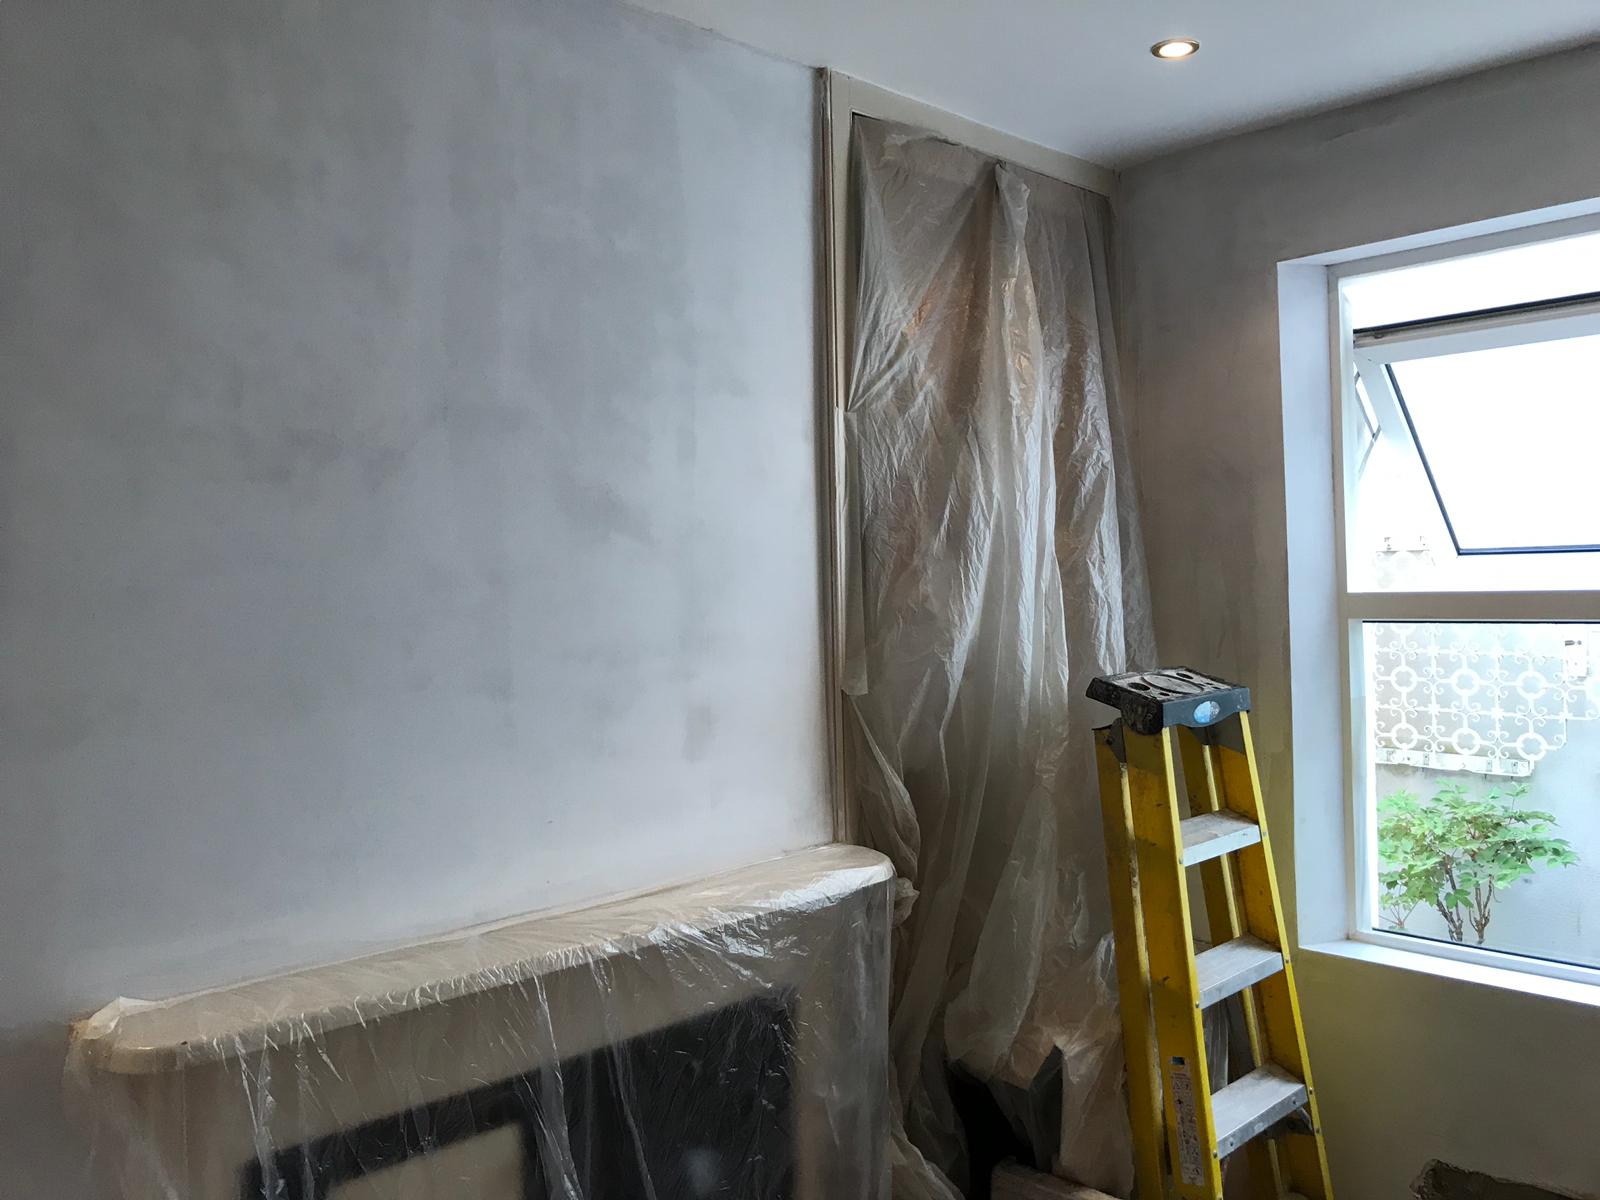 Plastered and painted wall